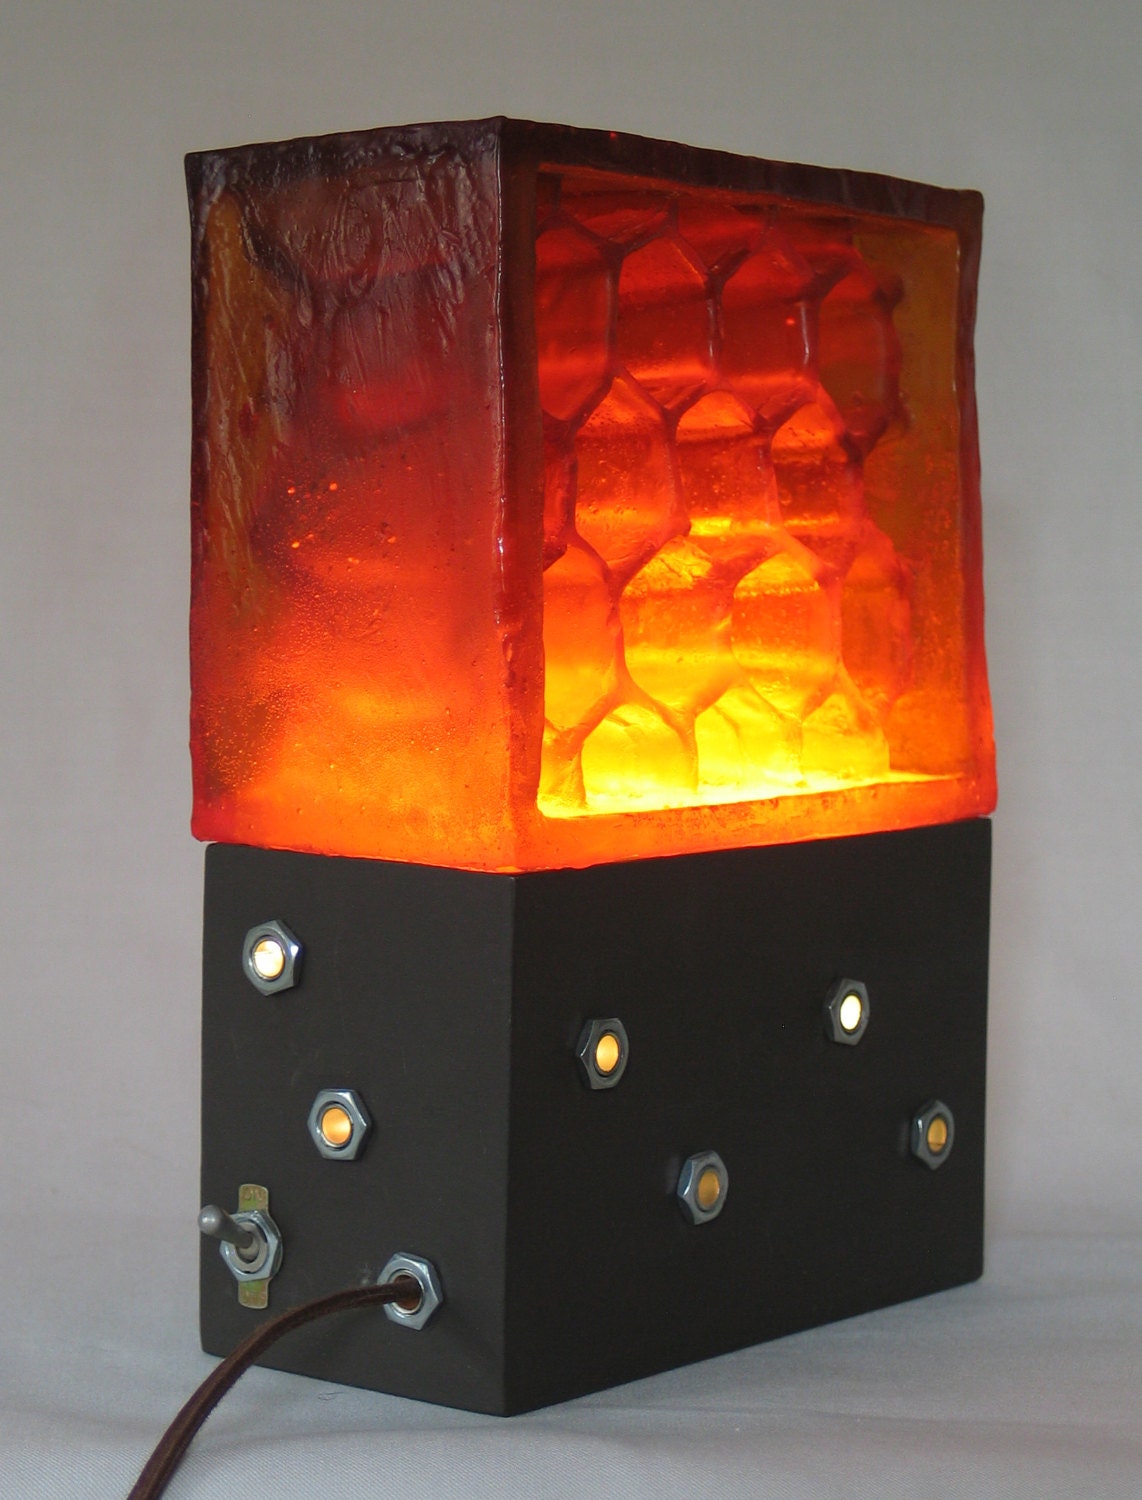 translucent amber honeycomb illuminated by a light hidden in opaque base